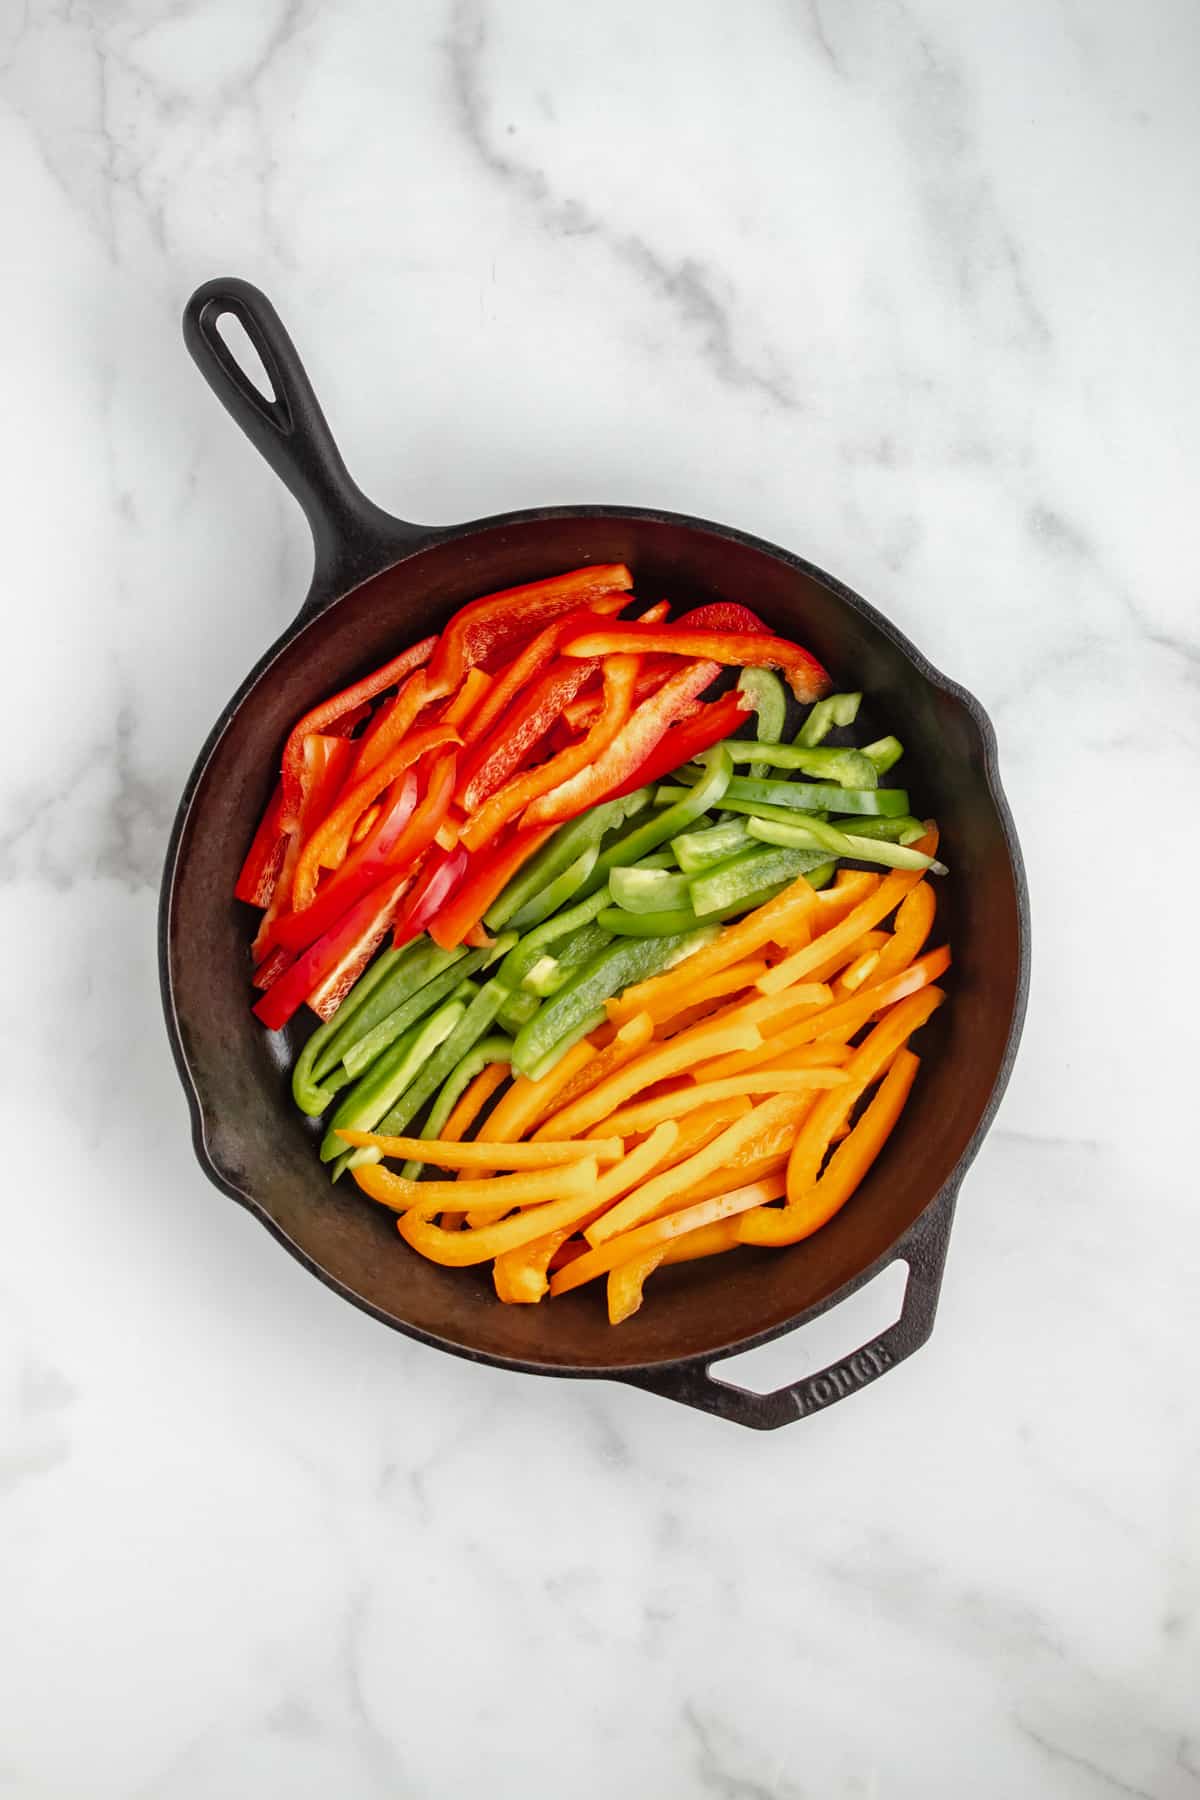 Sliced red, orange and green peppers in a cast iron skillet.